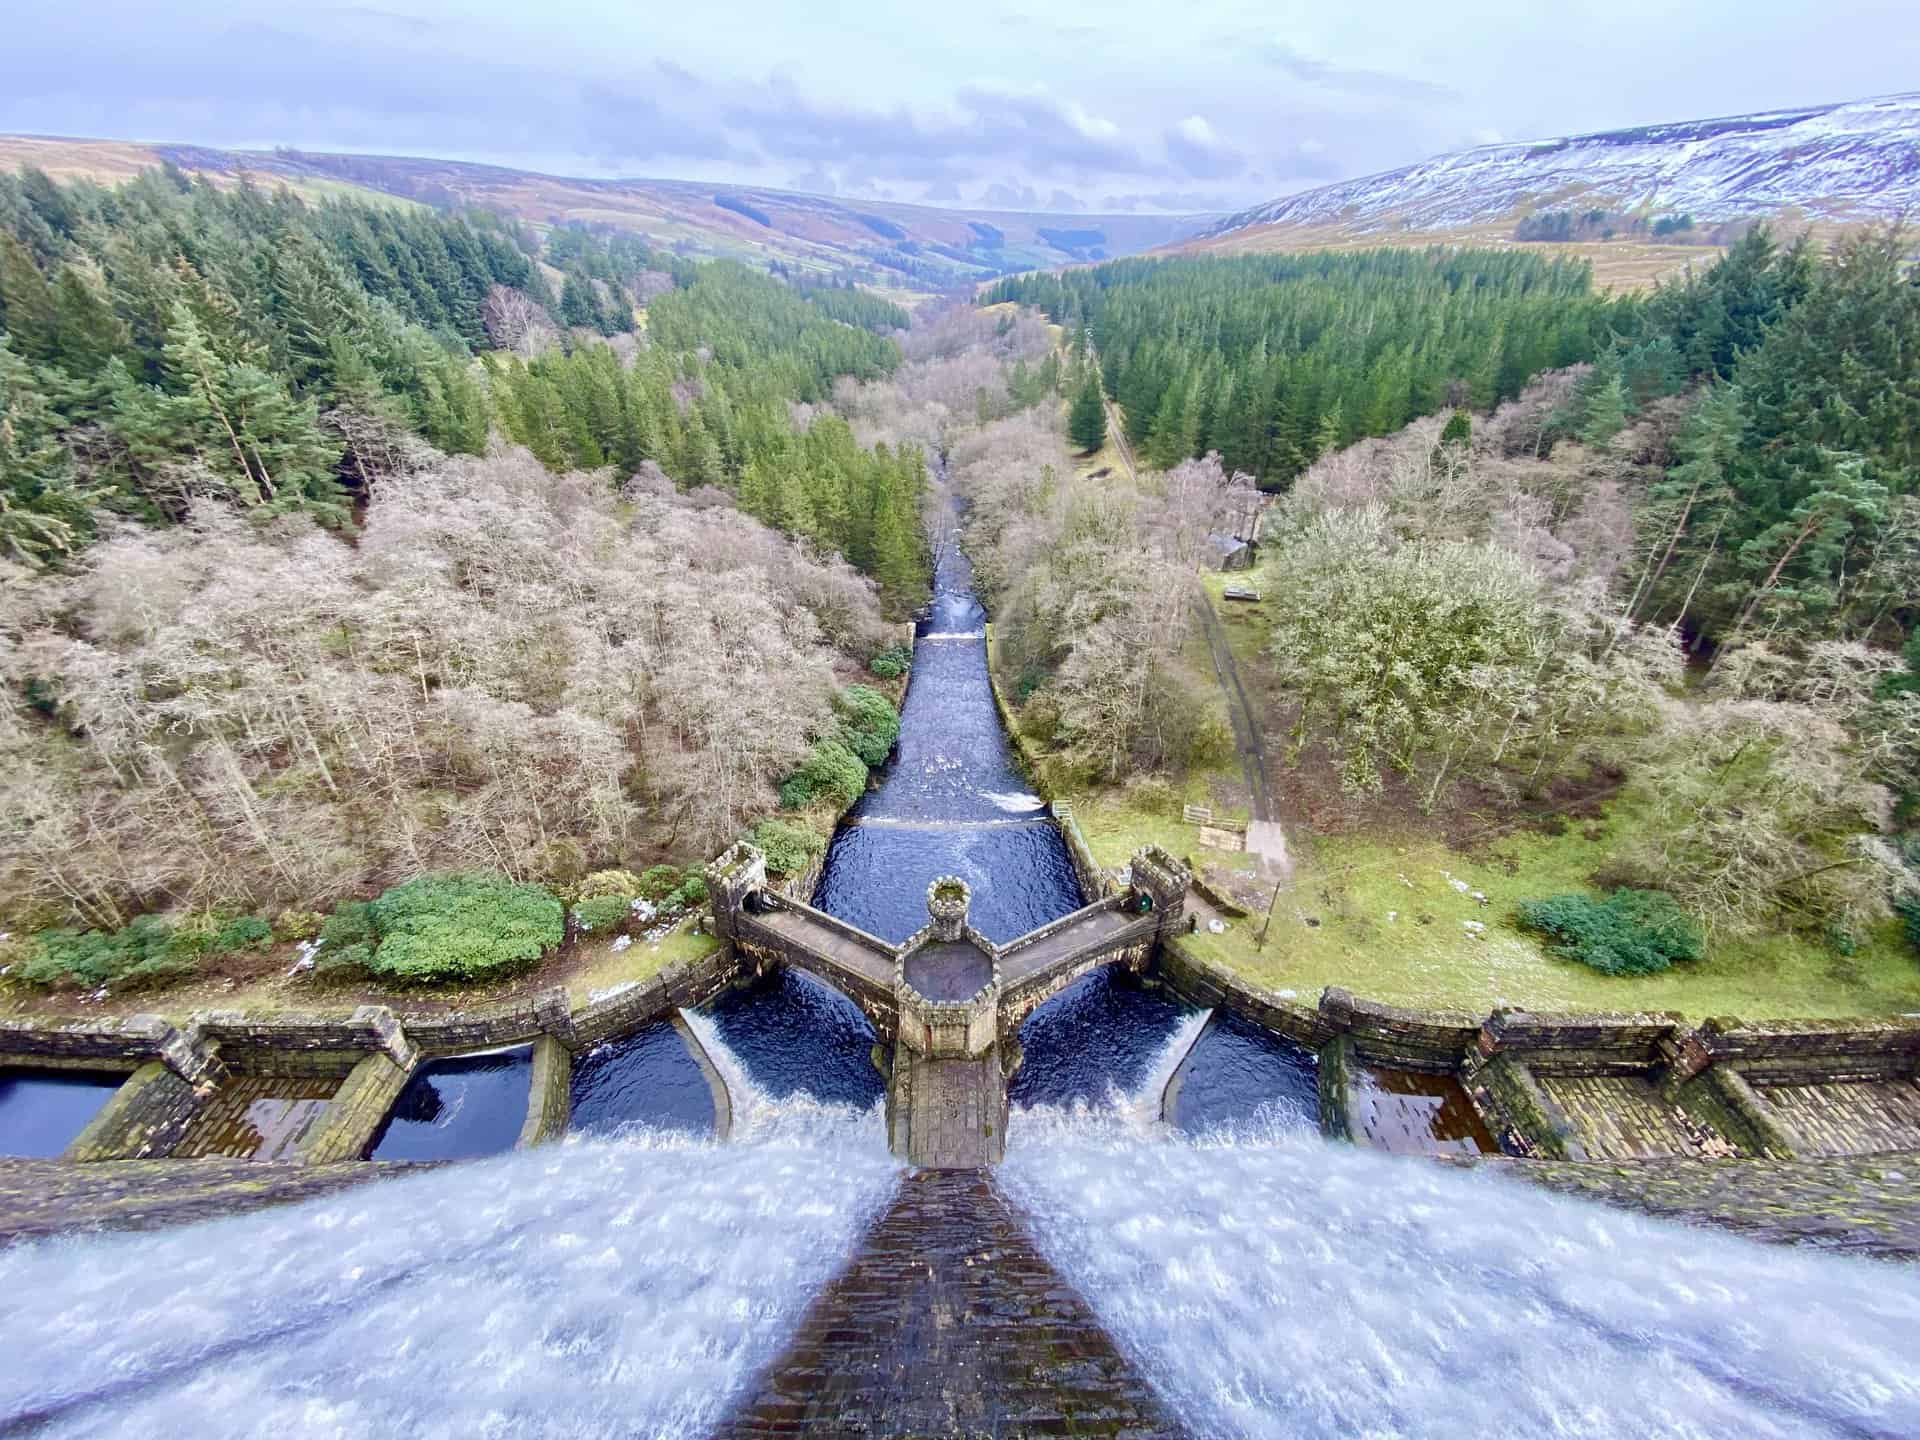 Waters cascading from the east side of the Scar House Reservoir dam, continuing their eastward flow through the Nidderdale valley.